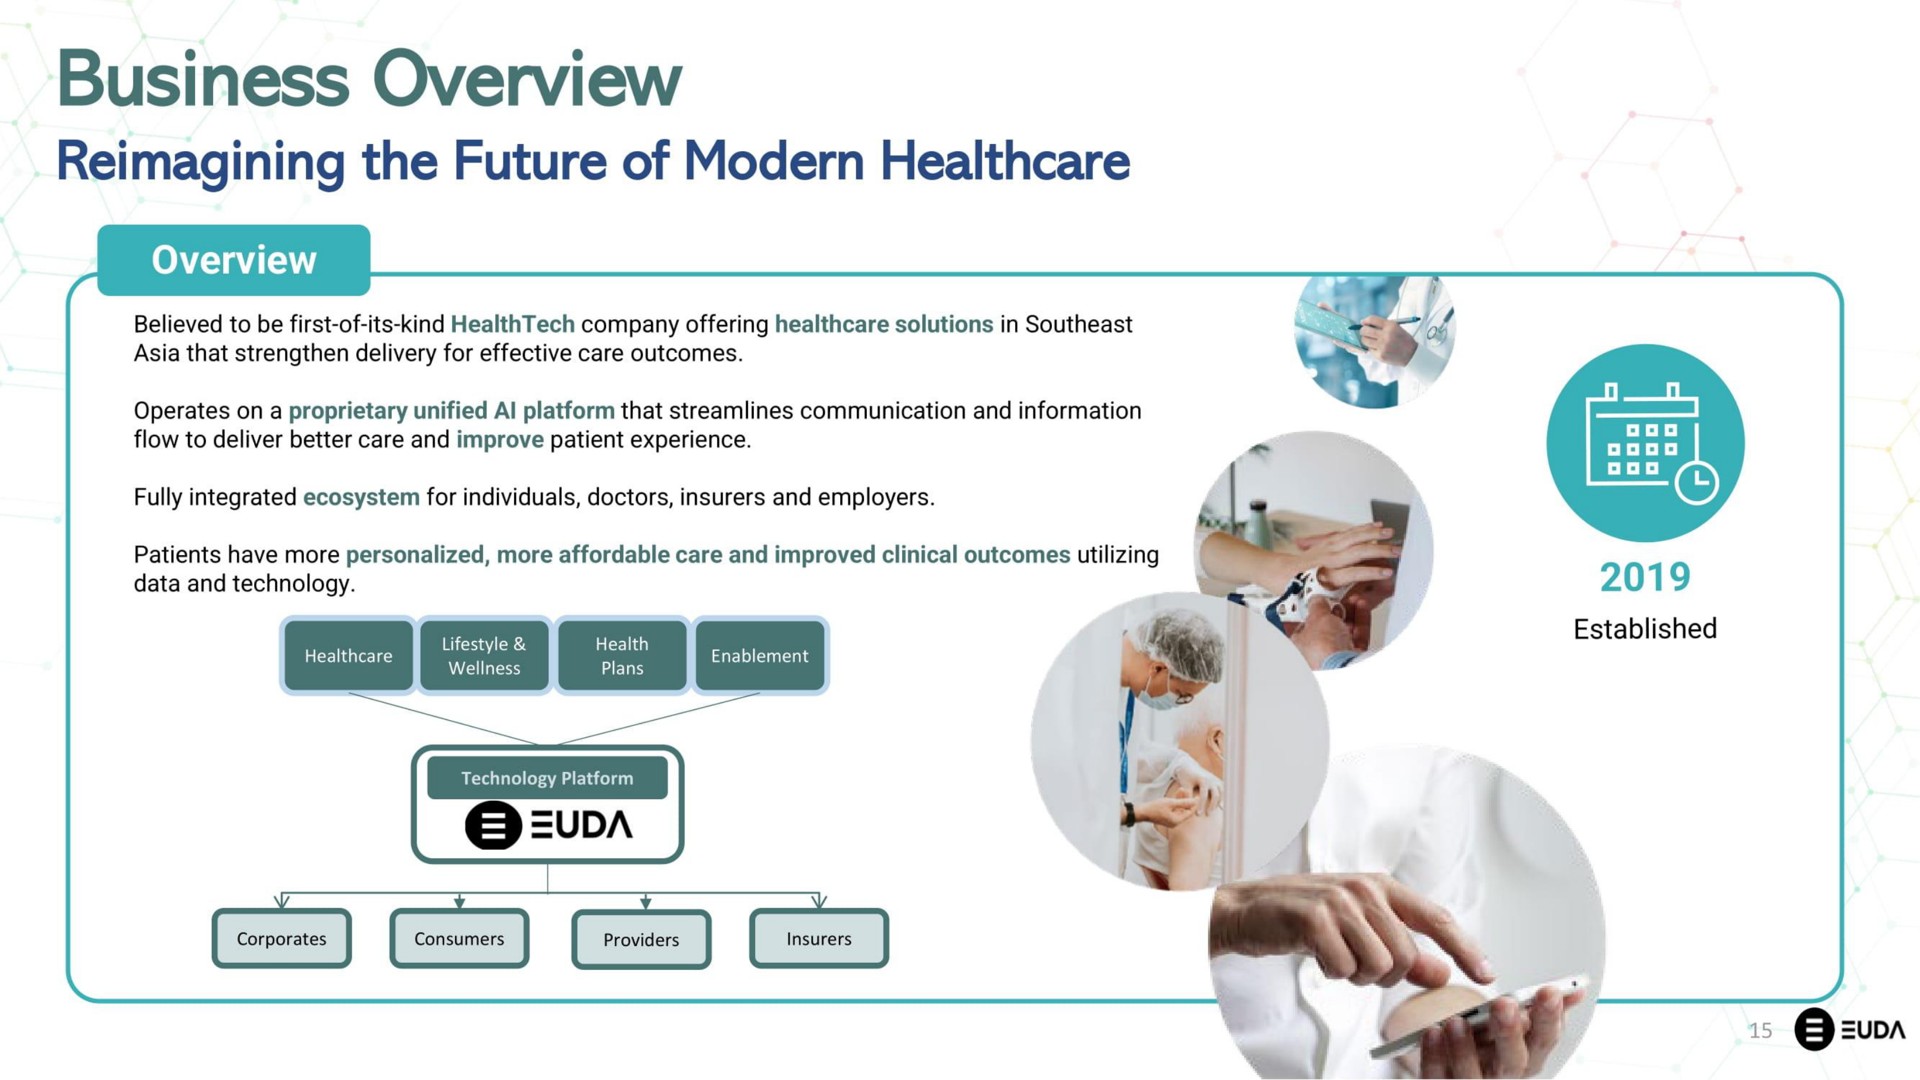 business overview | EUDA Health